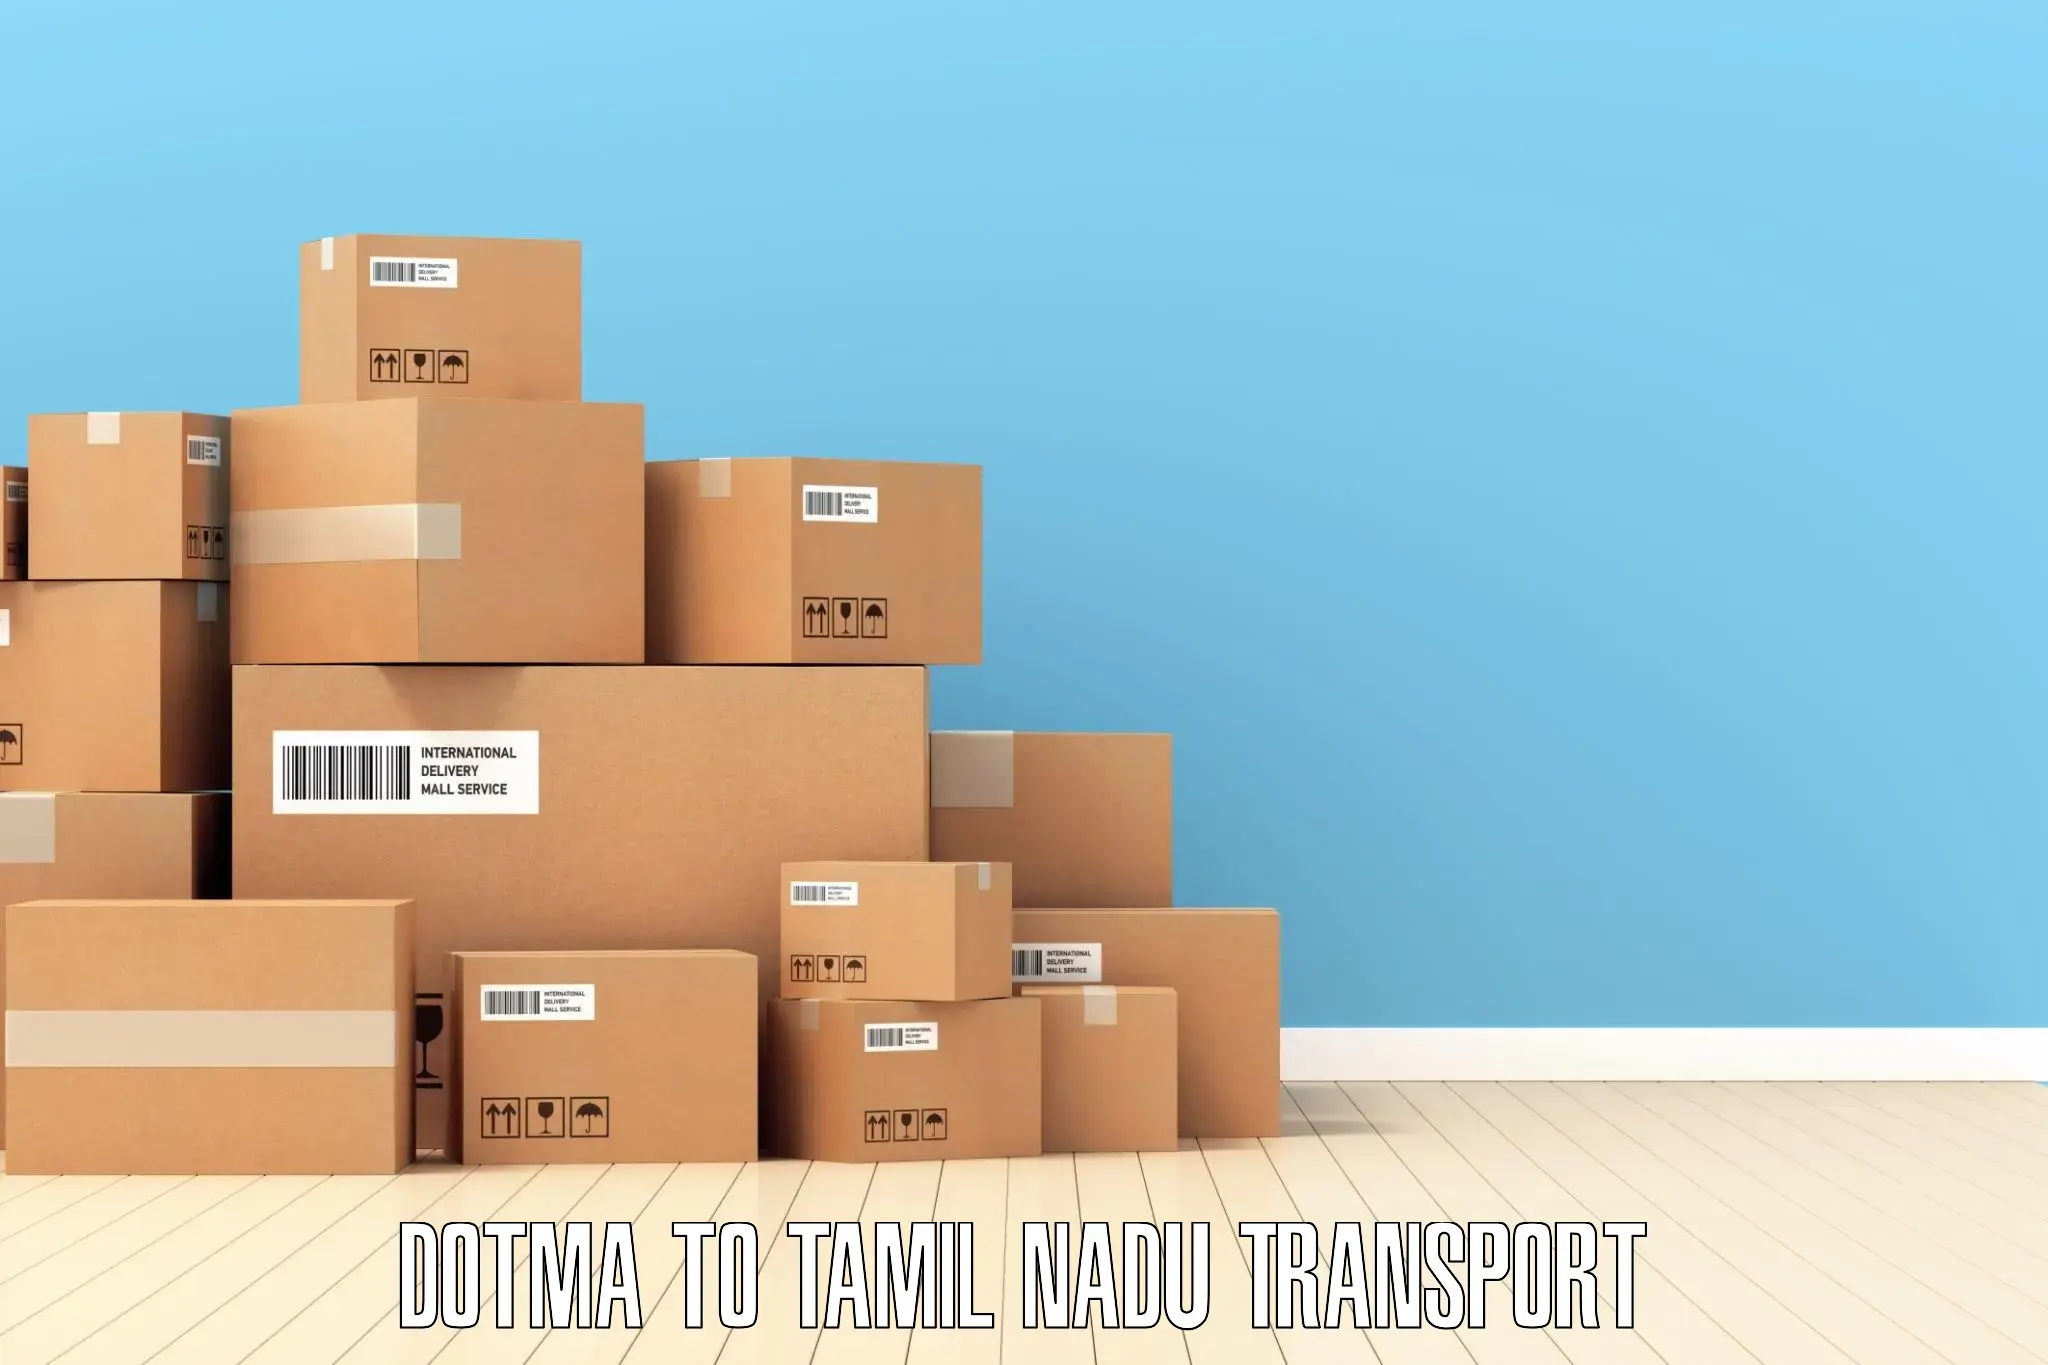 Transport shared services Dotma to Avadi